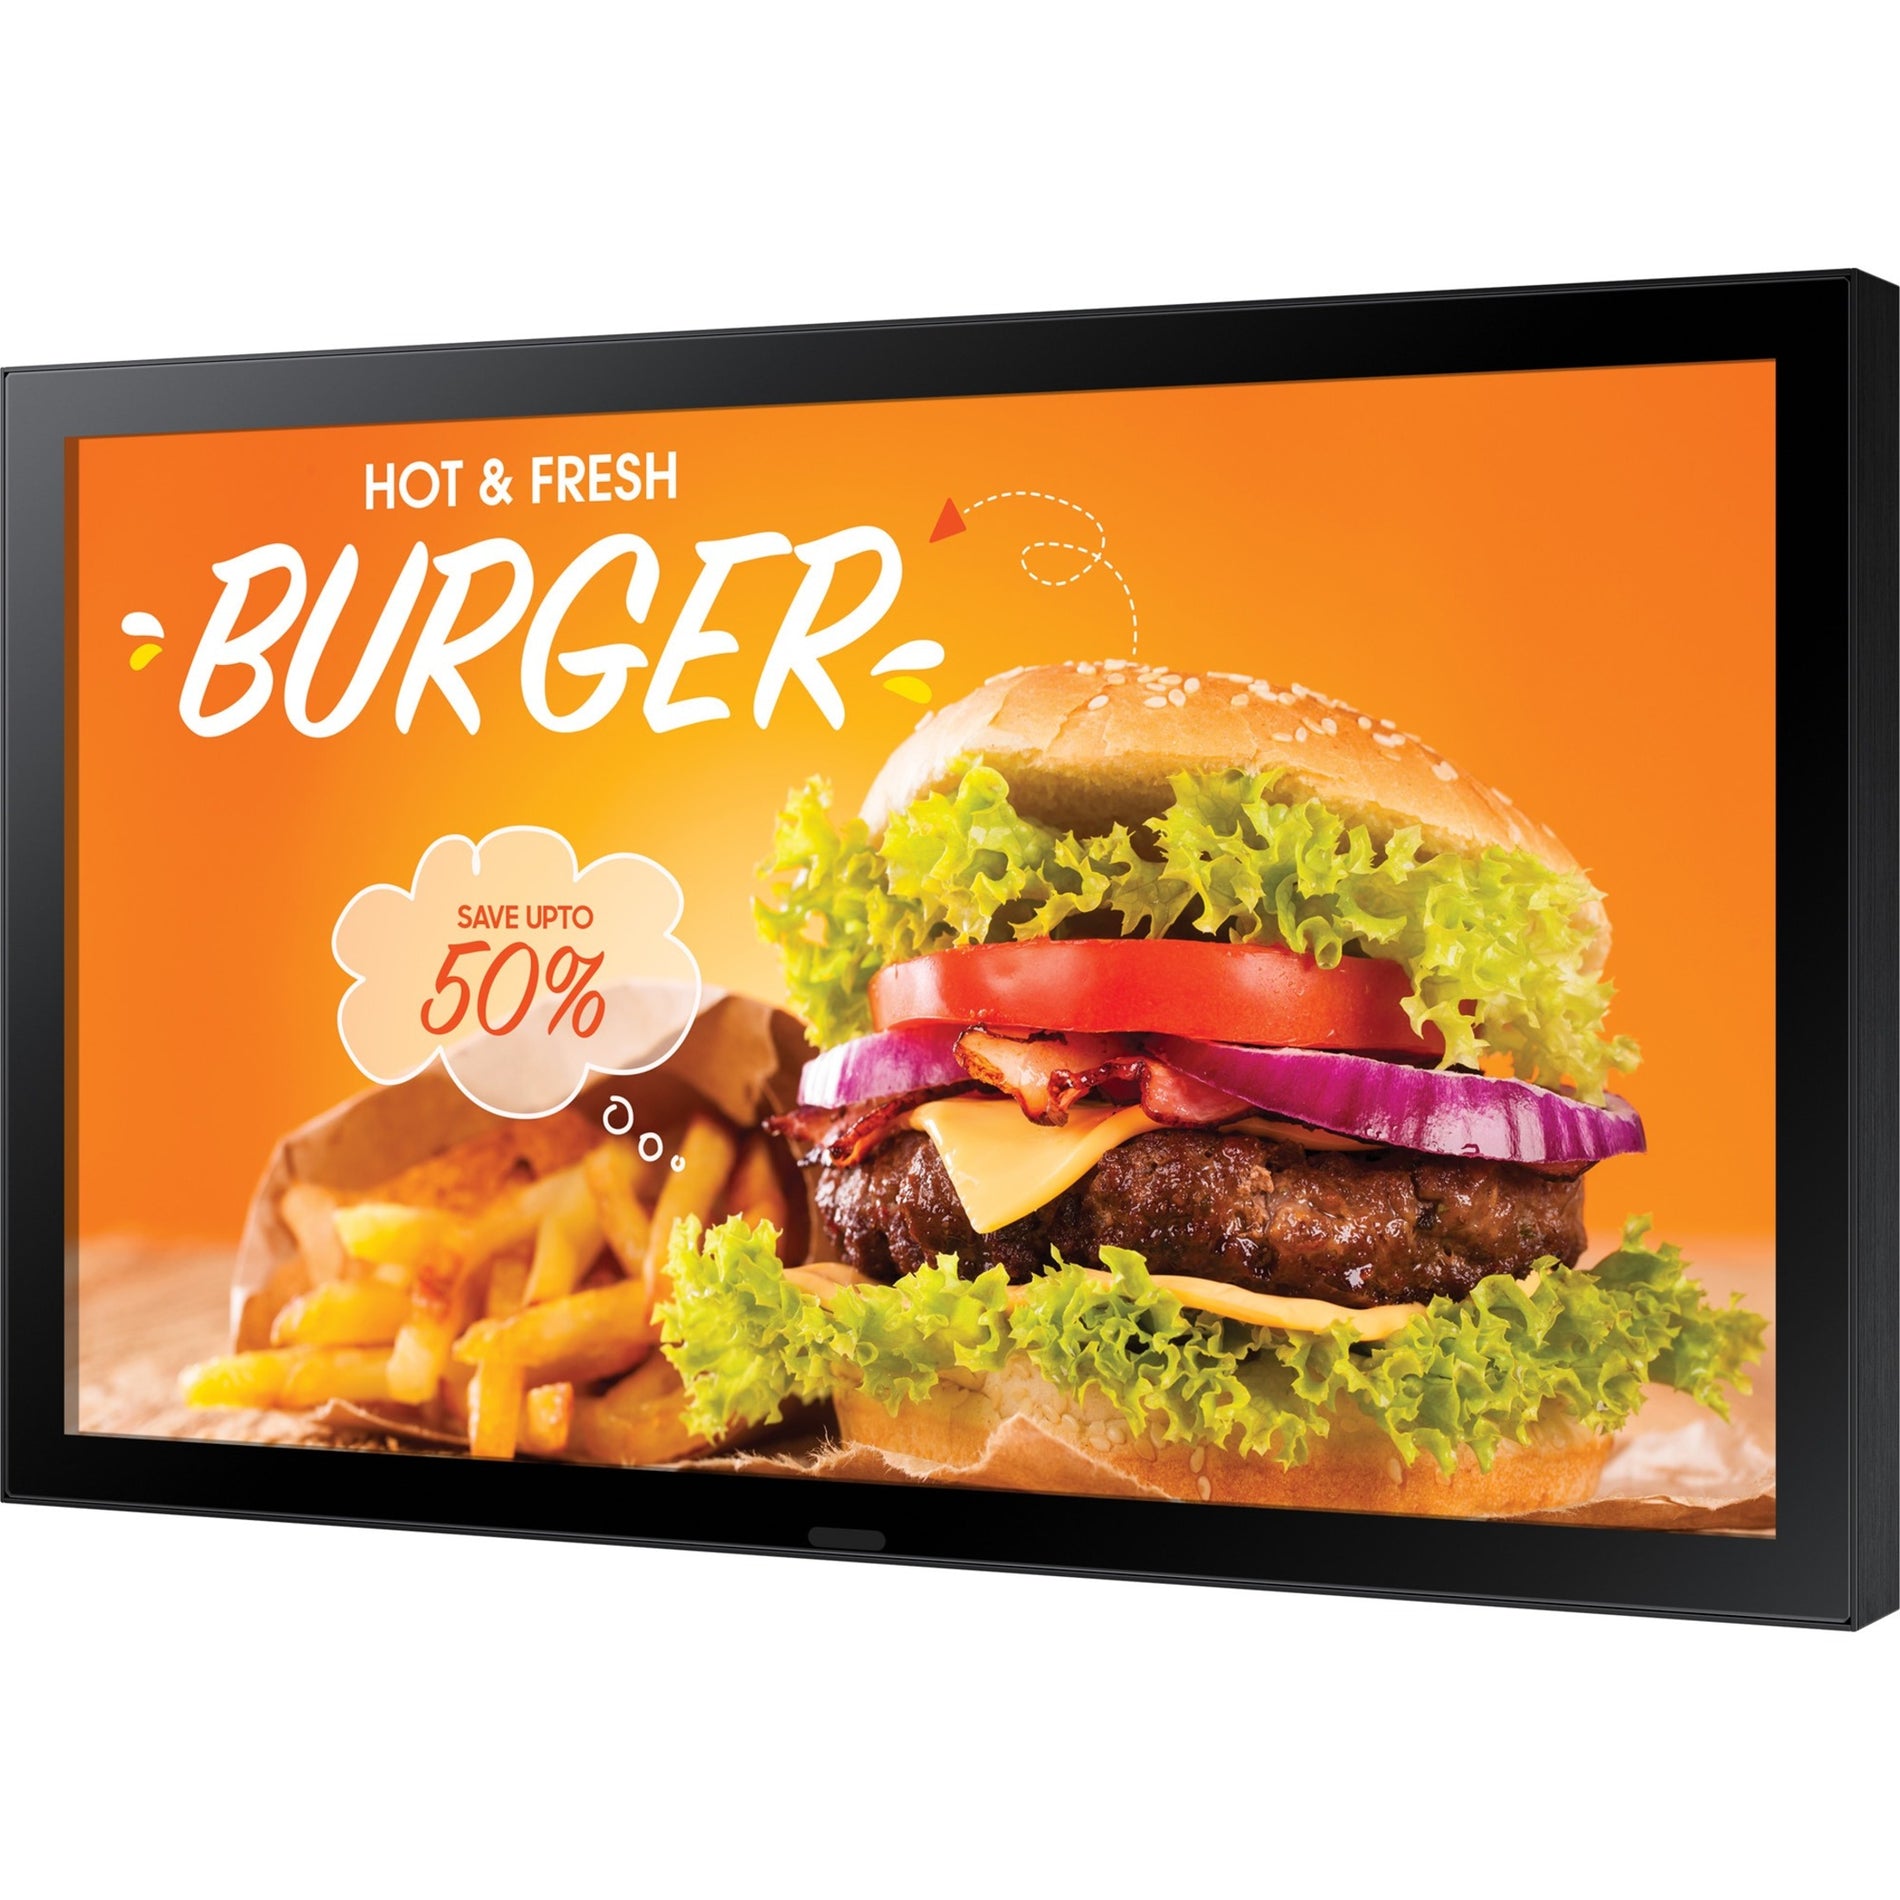 Samsung OH24B Digital Signage Display/Appliance, 24-inch High Brightness Commercial LFD Outdoor Display